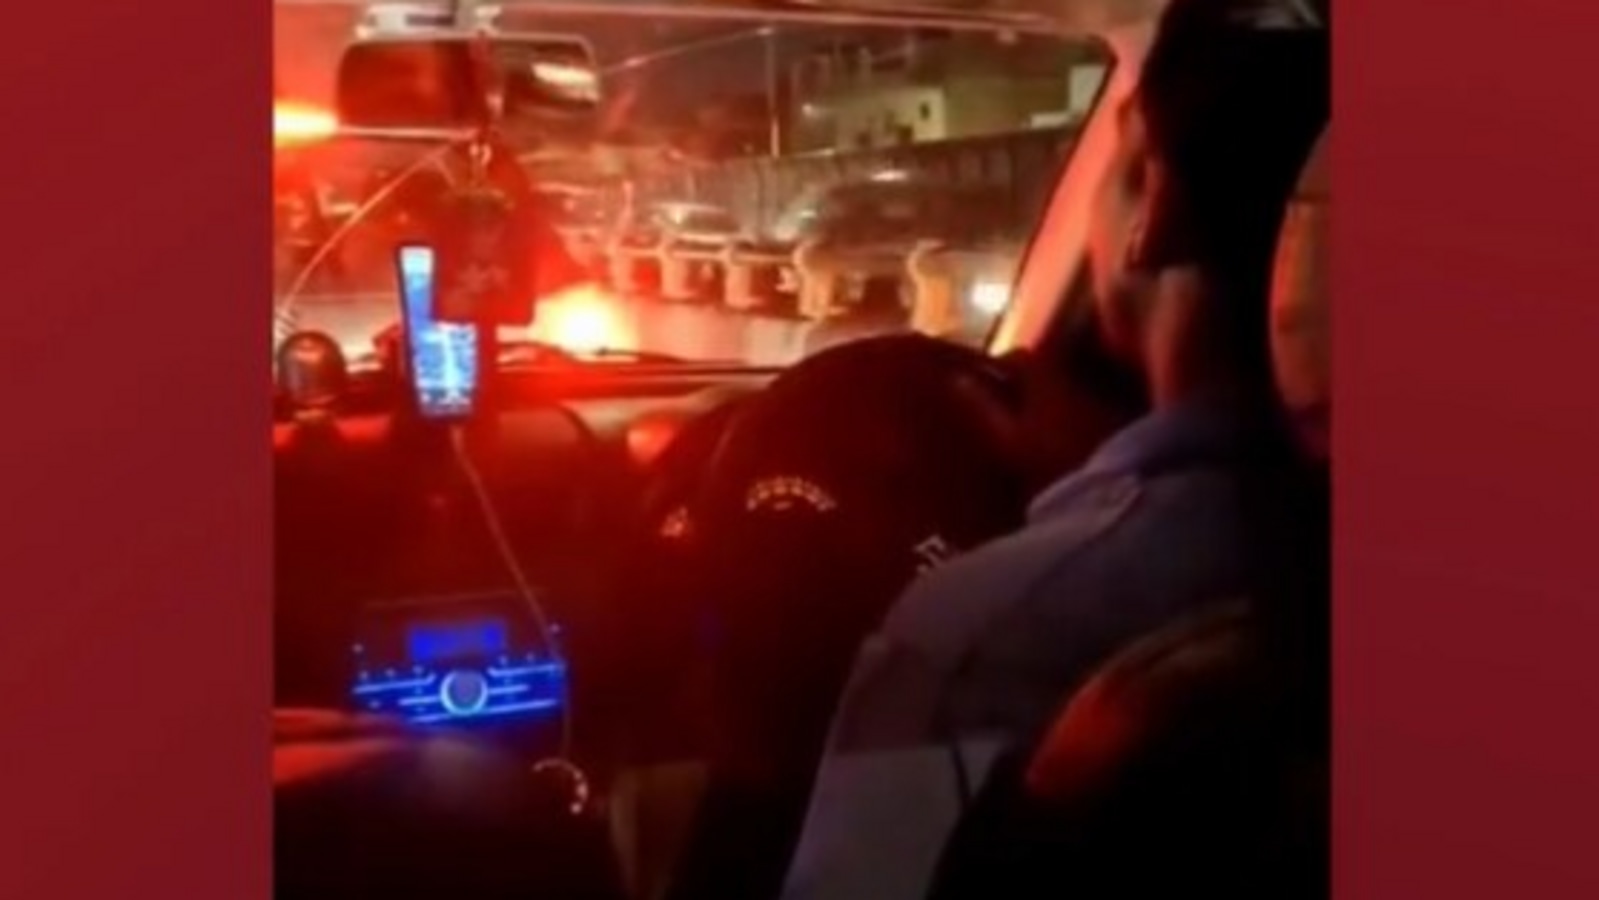 Delhi Police posts clip of cab driver singing while stuck in traffic